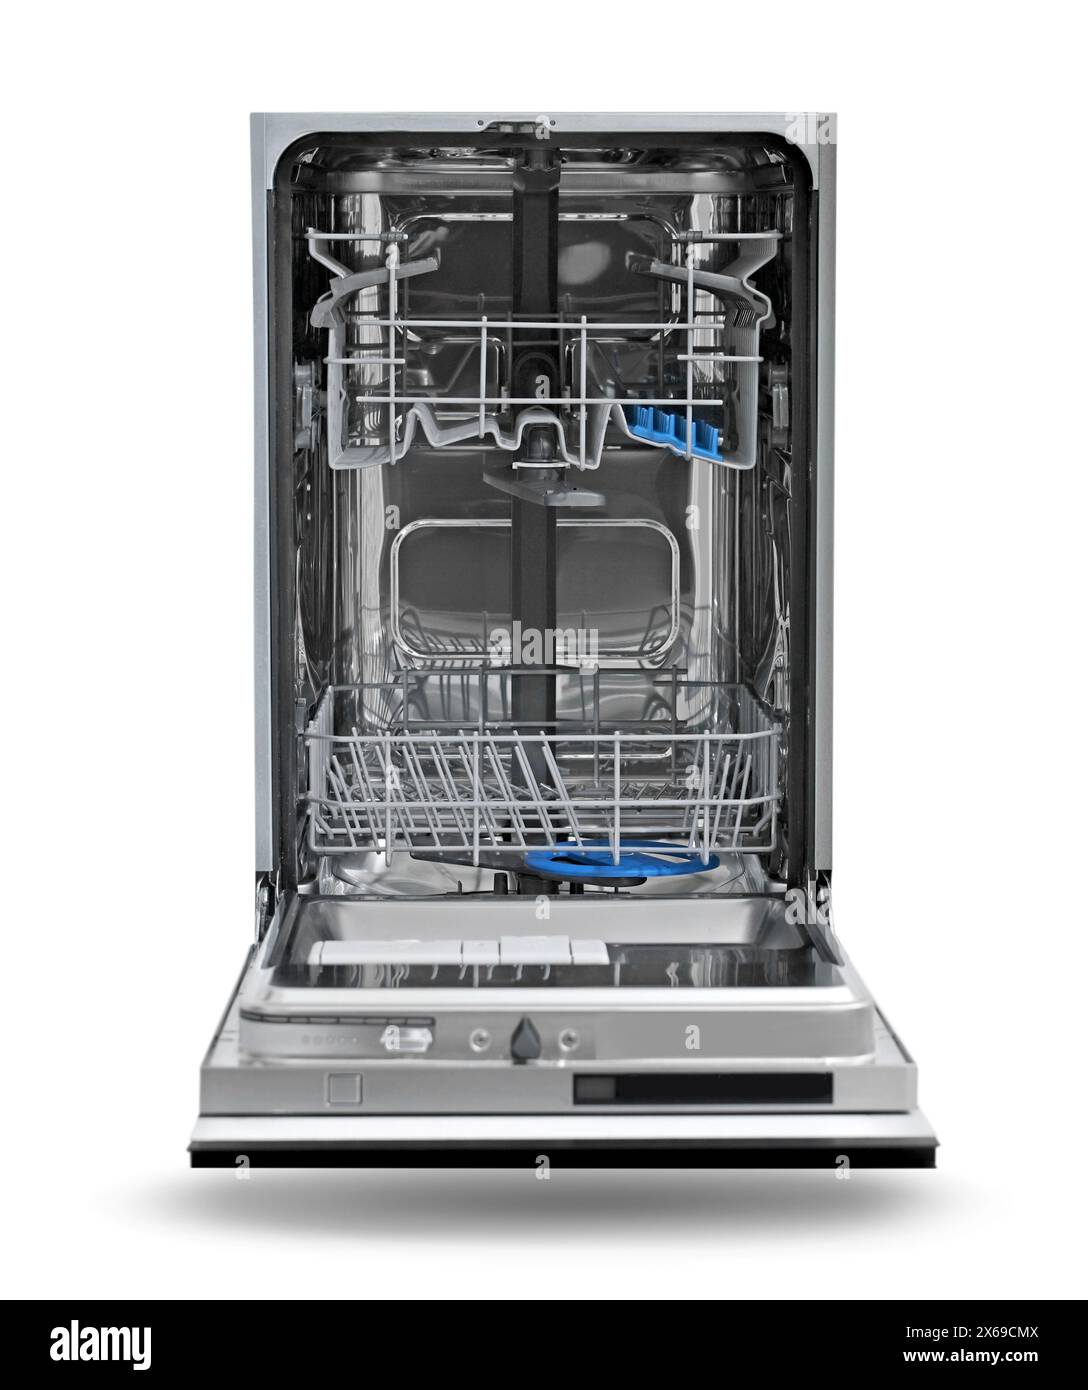 Empty modern dishwasher isolated on white. Home appliance Stock Photo